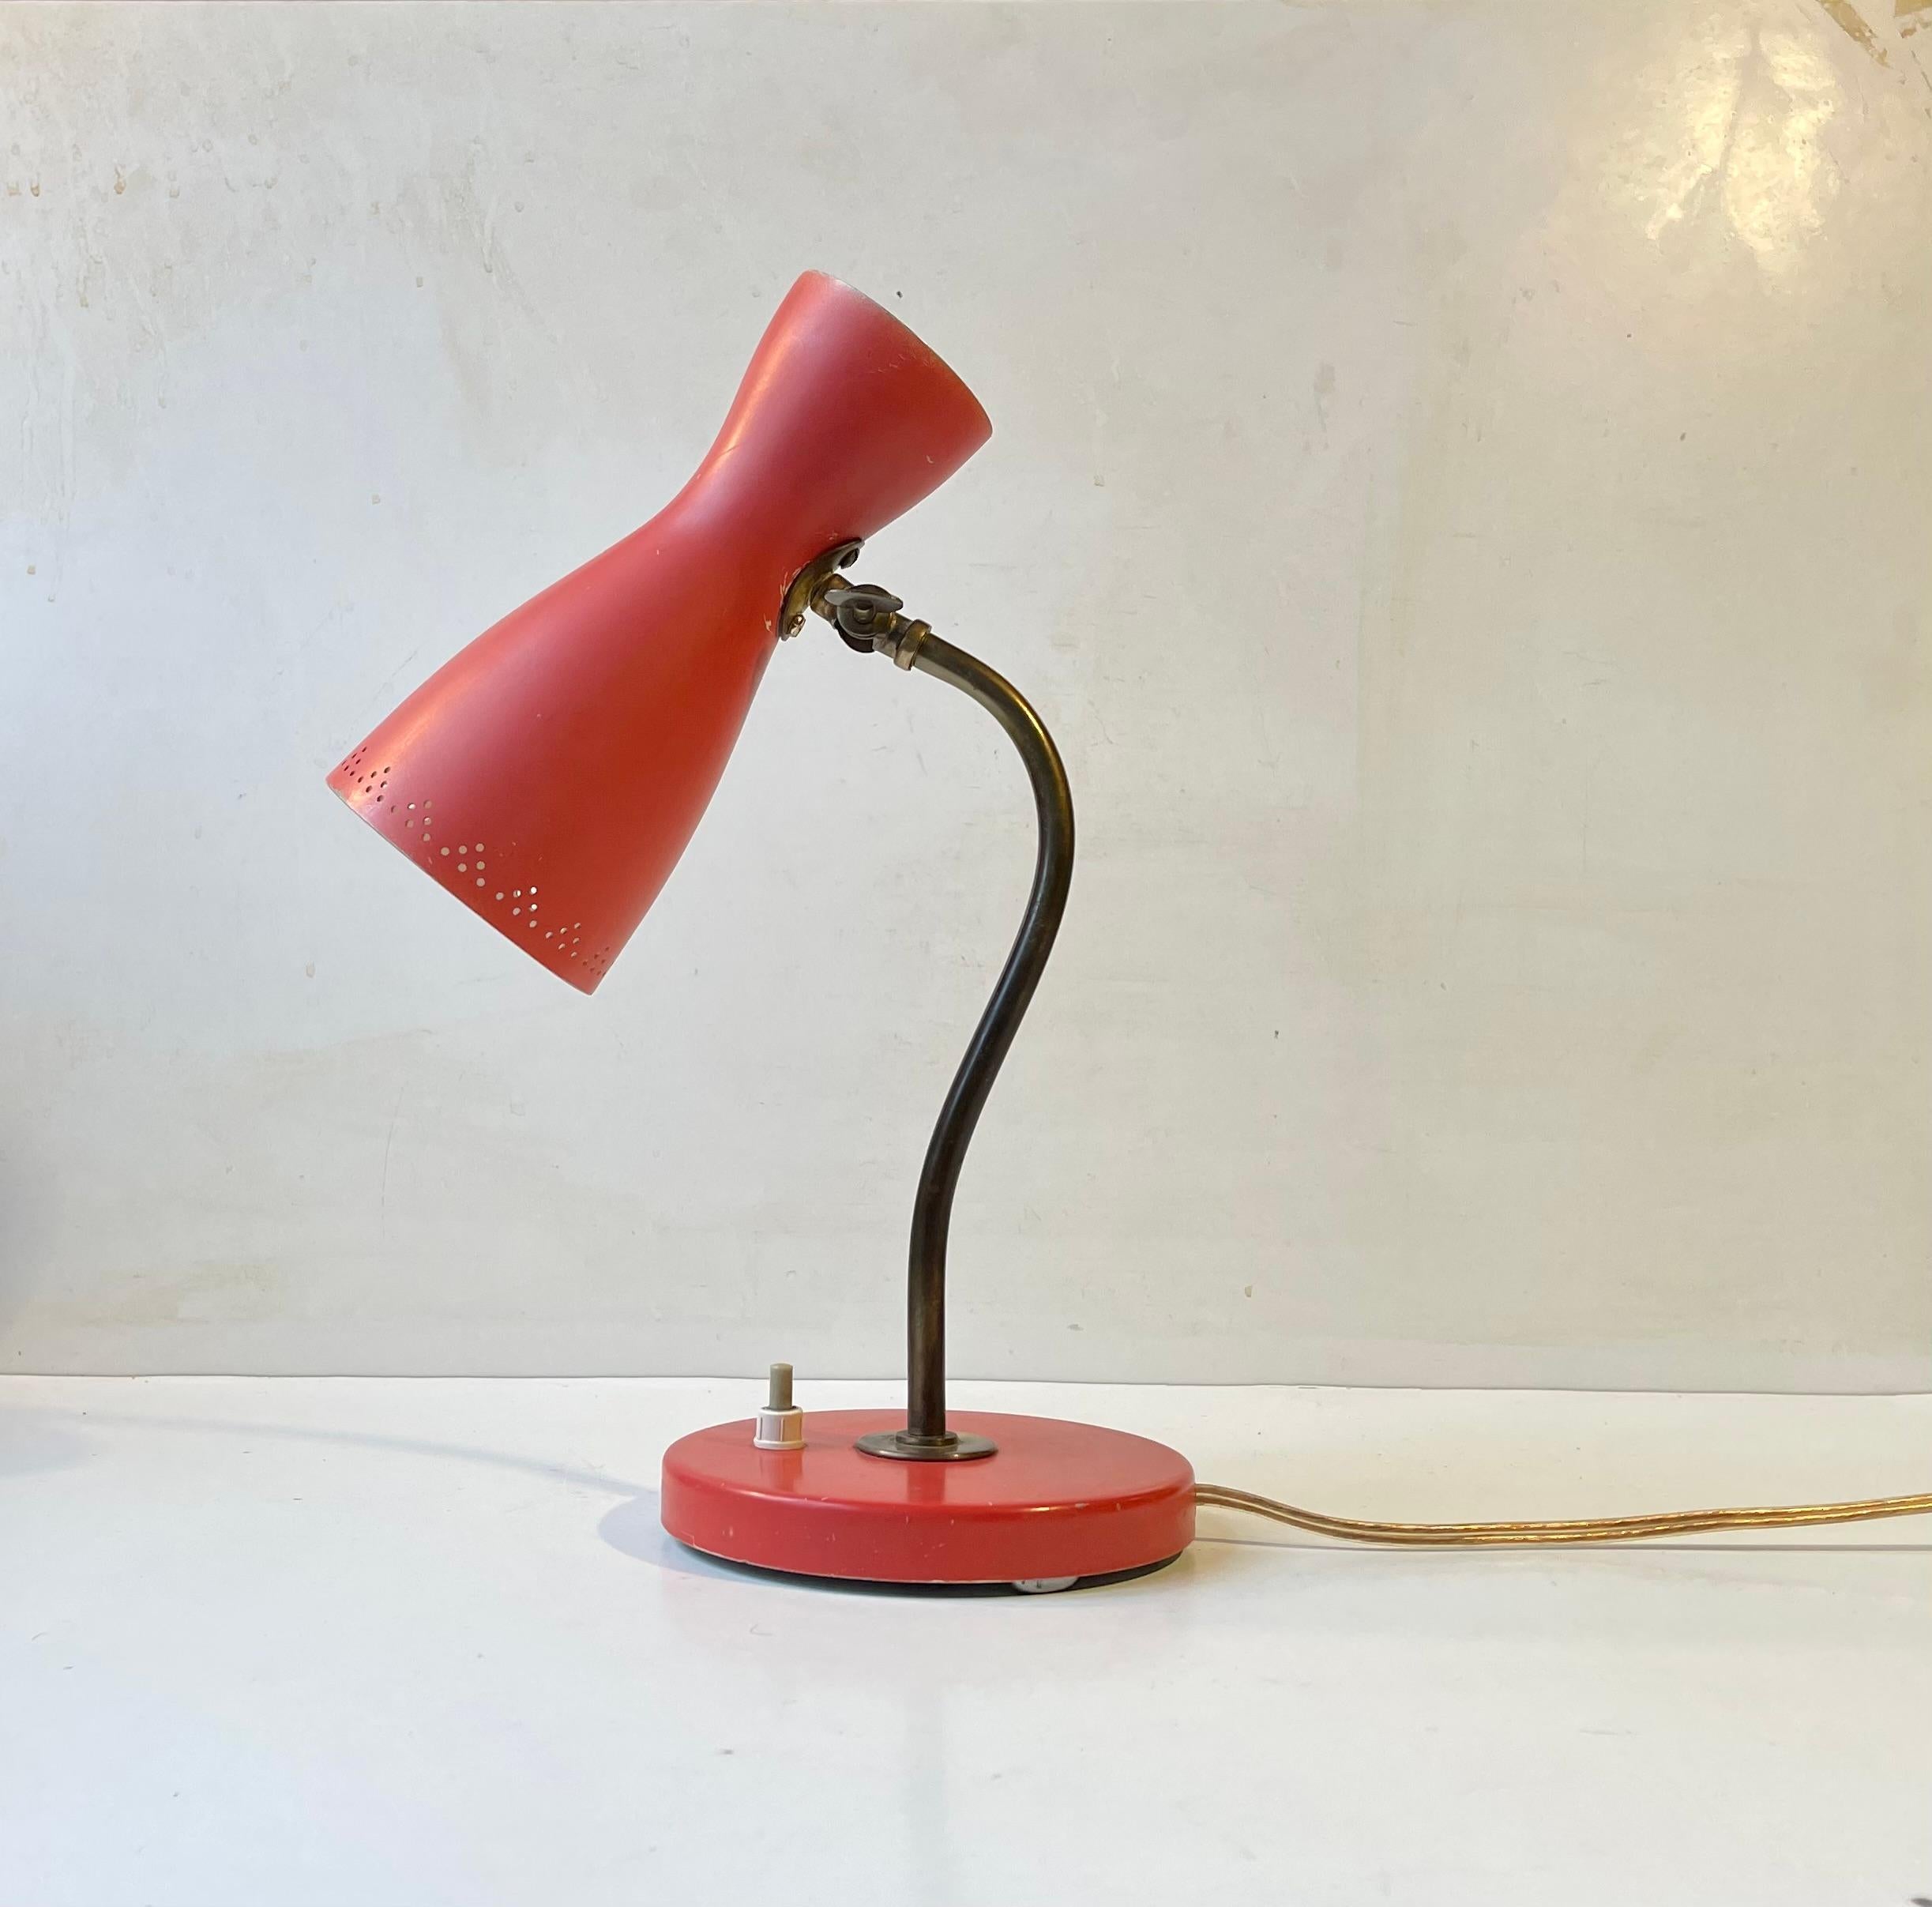 Small ASEA table, desk or nightstand lamp attributed to Svend Aage Holm-Sørensen and made by ASEA in Sweden during the 1950s in a style reminiscent of French Modernist and Italian Stilnovo lighting. It features an organically shaped almost